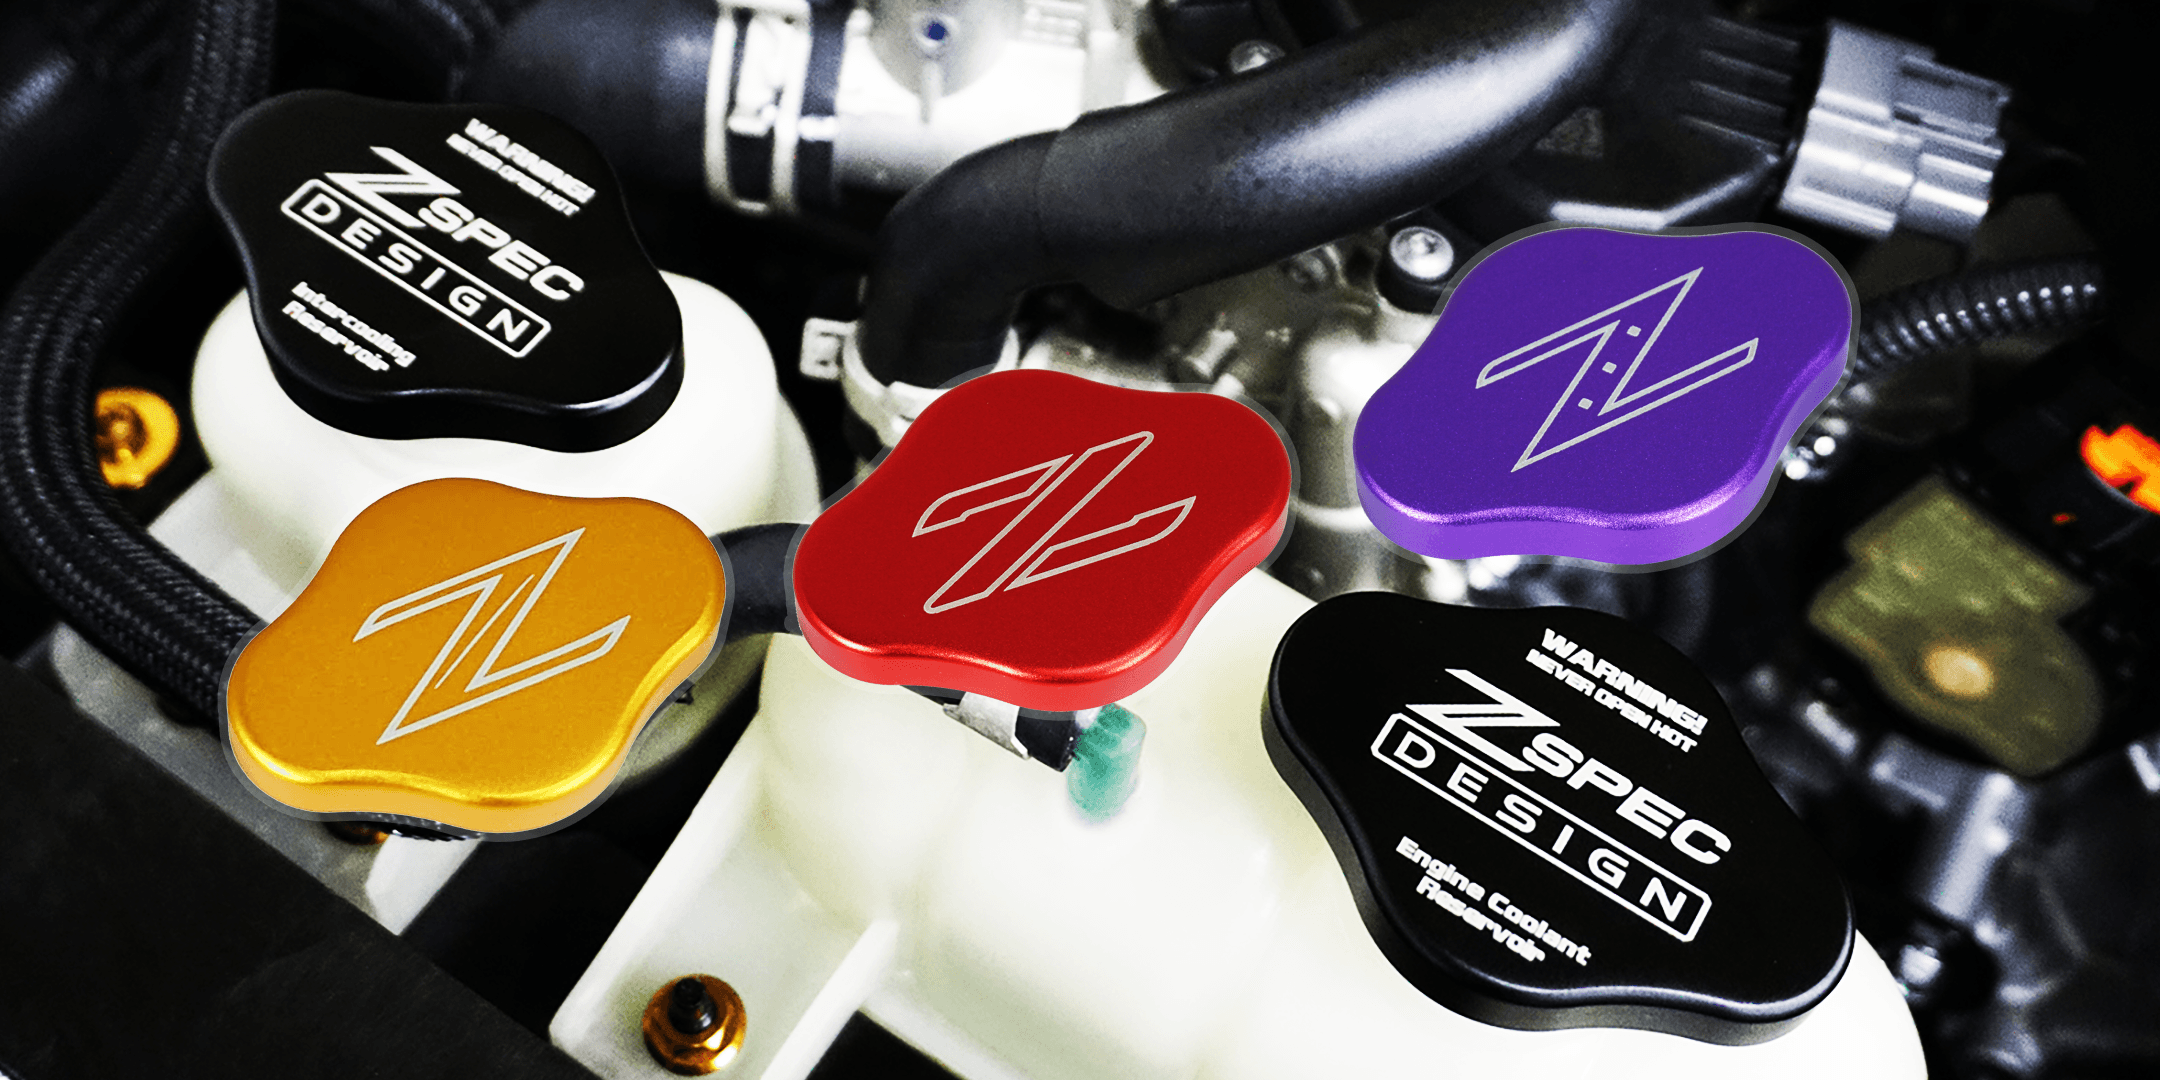 ZSPEC Design LLC Fluid Cap Covers - Radiator Cap Cover, fitting over a variety of OEM radiator caps for aesthetic upgrade.  Billet Aluminum cover, affixes with hex set-screws.  Allen Key Included.